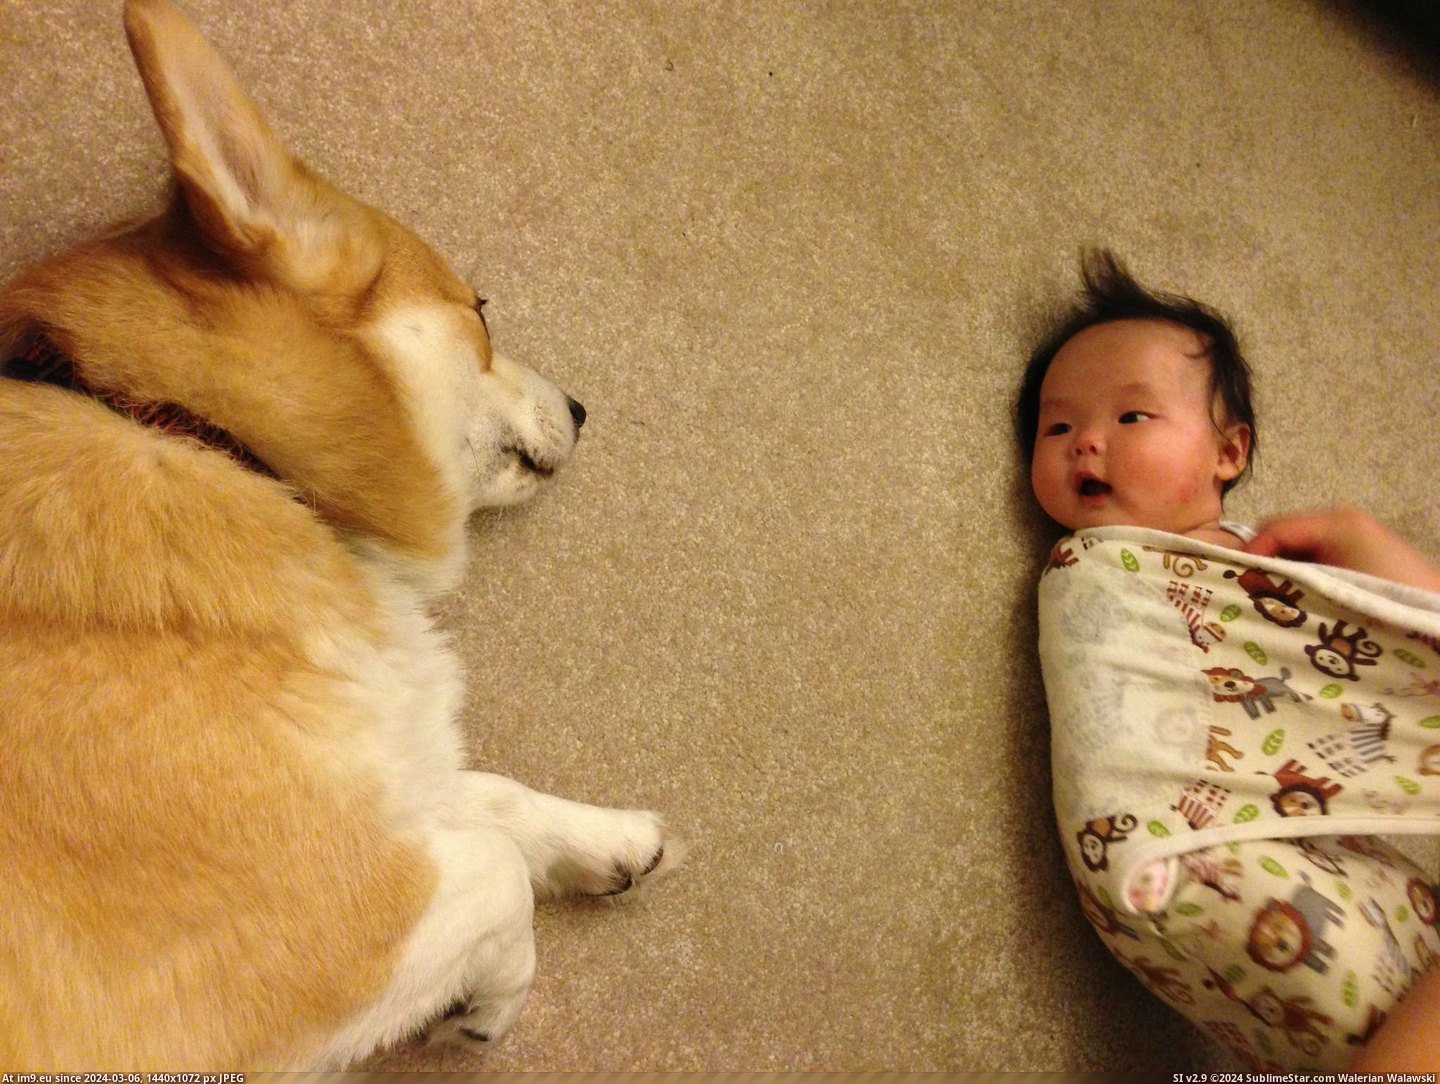 #Old #Likes #Daughter #Depressed #Counseli #Psychiatrist #Month #Corgi #Lie [Aww] My corgi likes to lie down next to my 4 month old daughter. It looks like he's depressed and she's a psychiatrist counseli Pic. (Изображение из альбом My r/AWW favs))